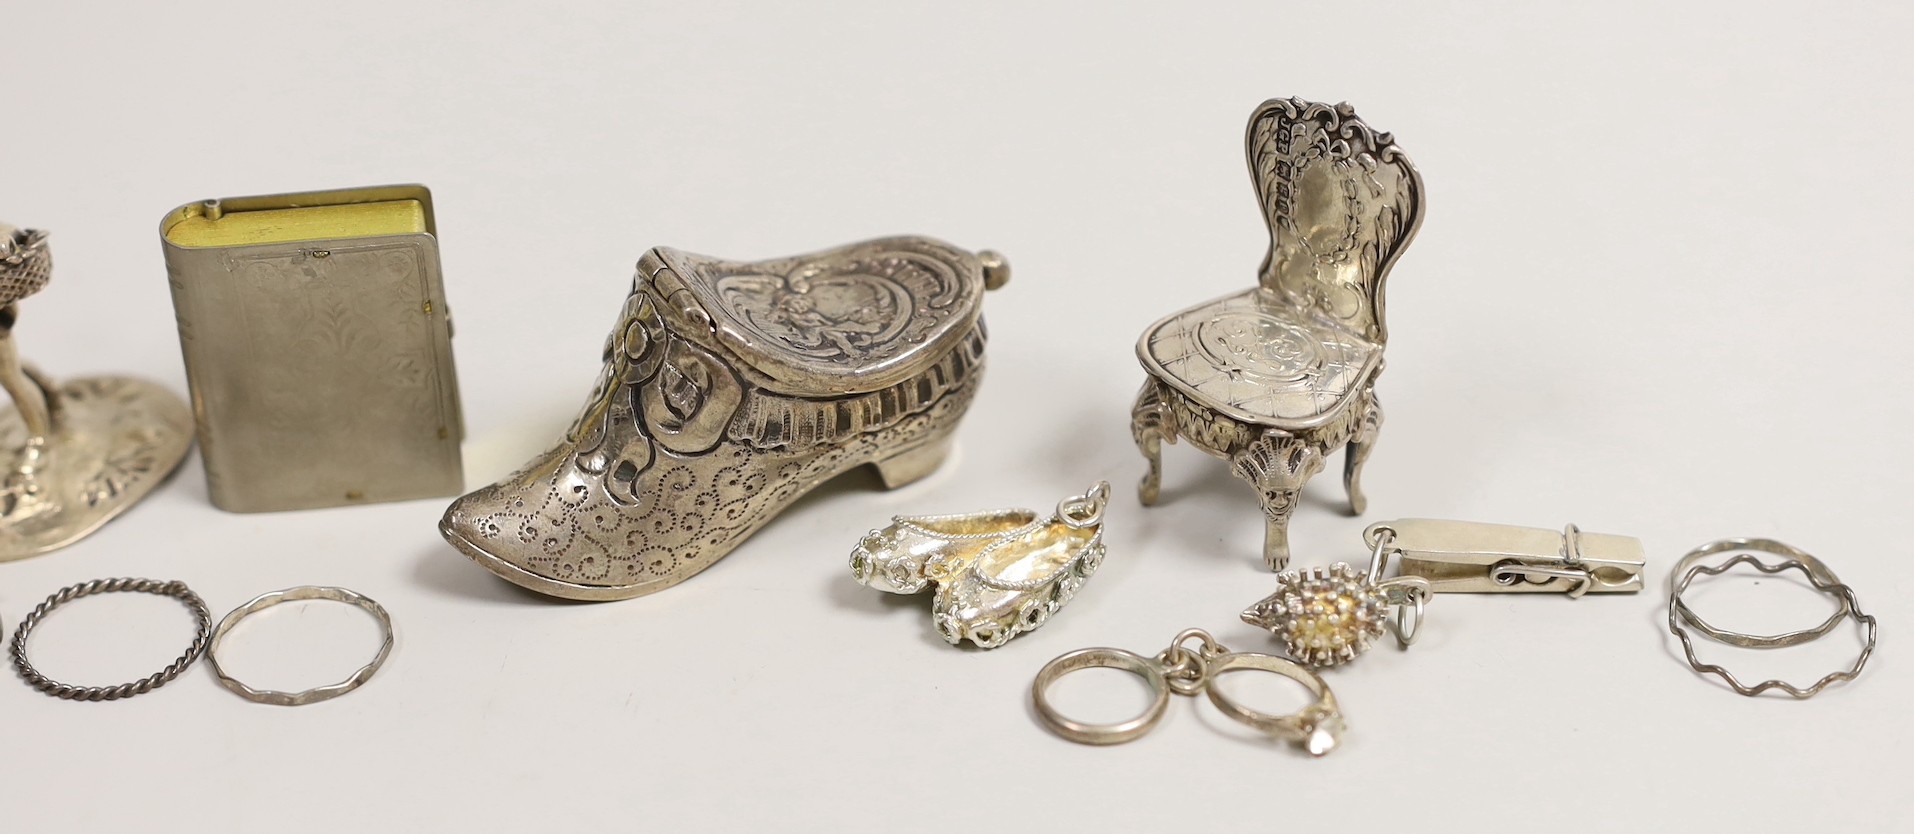 An Edwardian silver miniature model of an occasional chair, import marks for London, 1902, 43mm, a continental white metal model of a shoe and a similar model of a young child, a base metal 'book' box containing a rosary